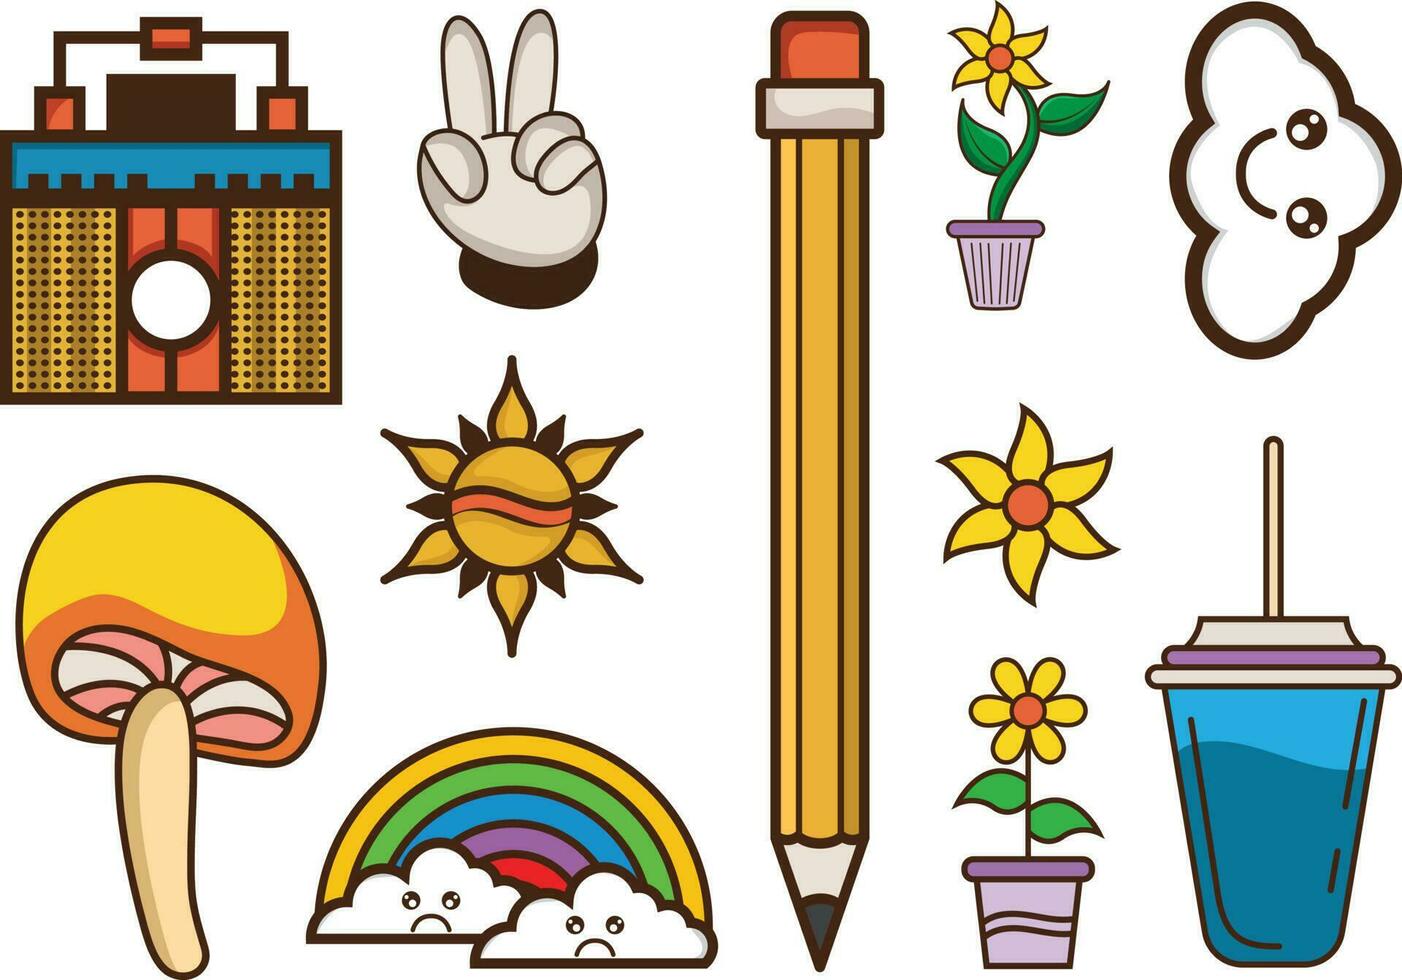 Hand drawn 90's Retro element Clipart collection set. vector